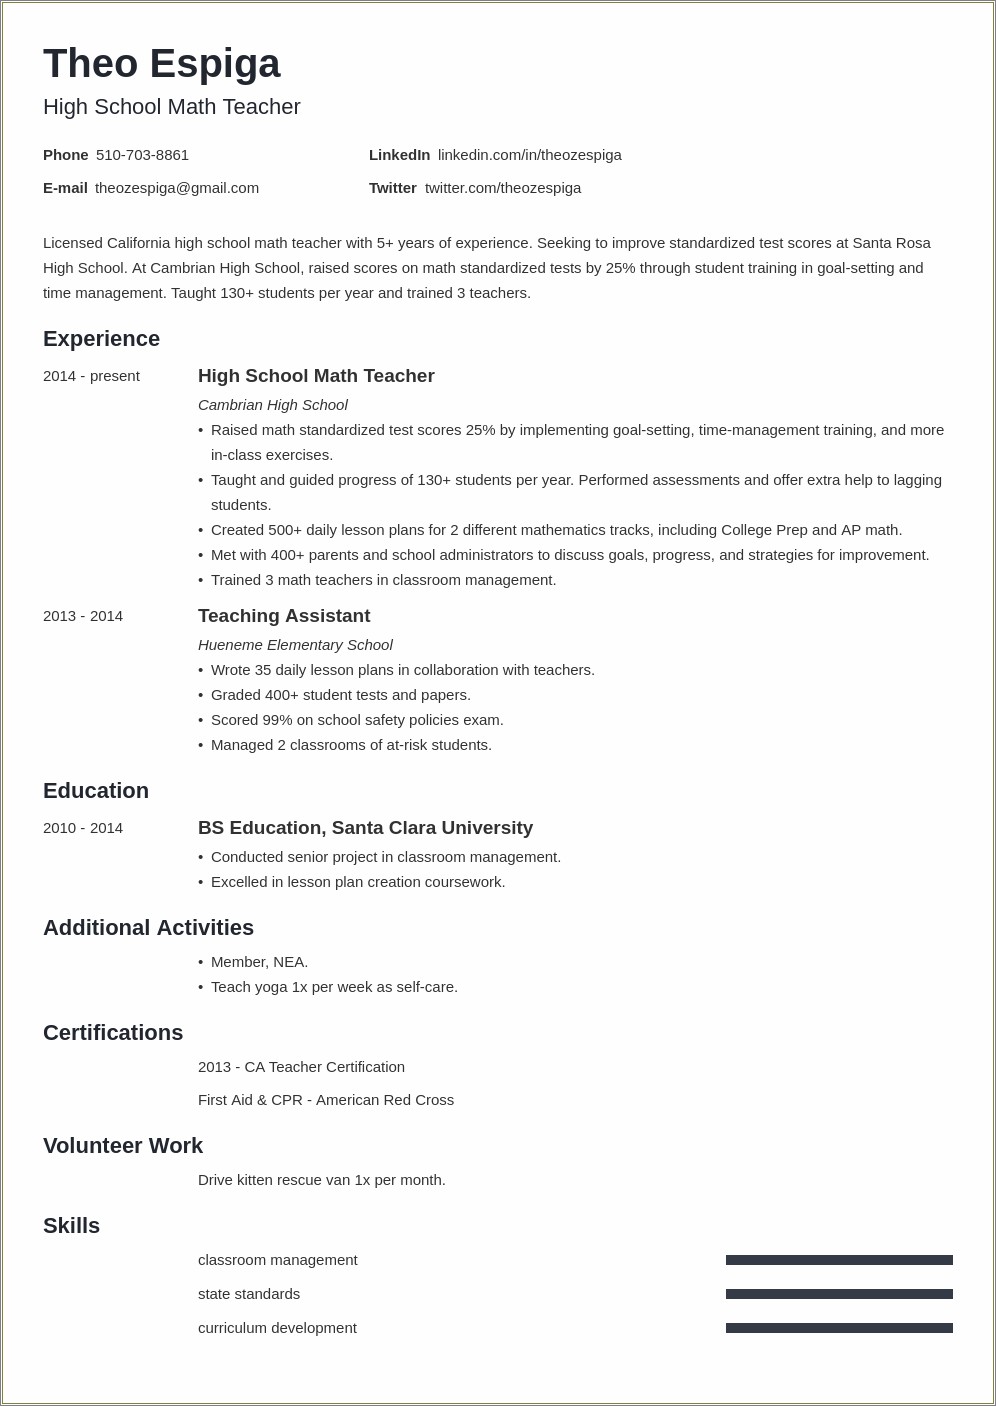 Put Currently Attending University On Resume